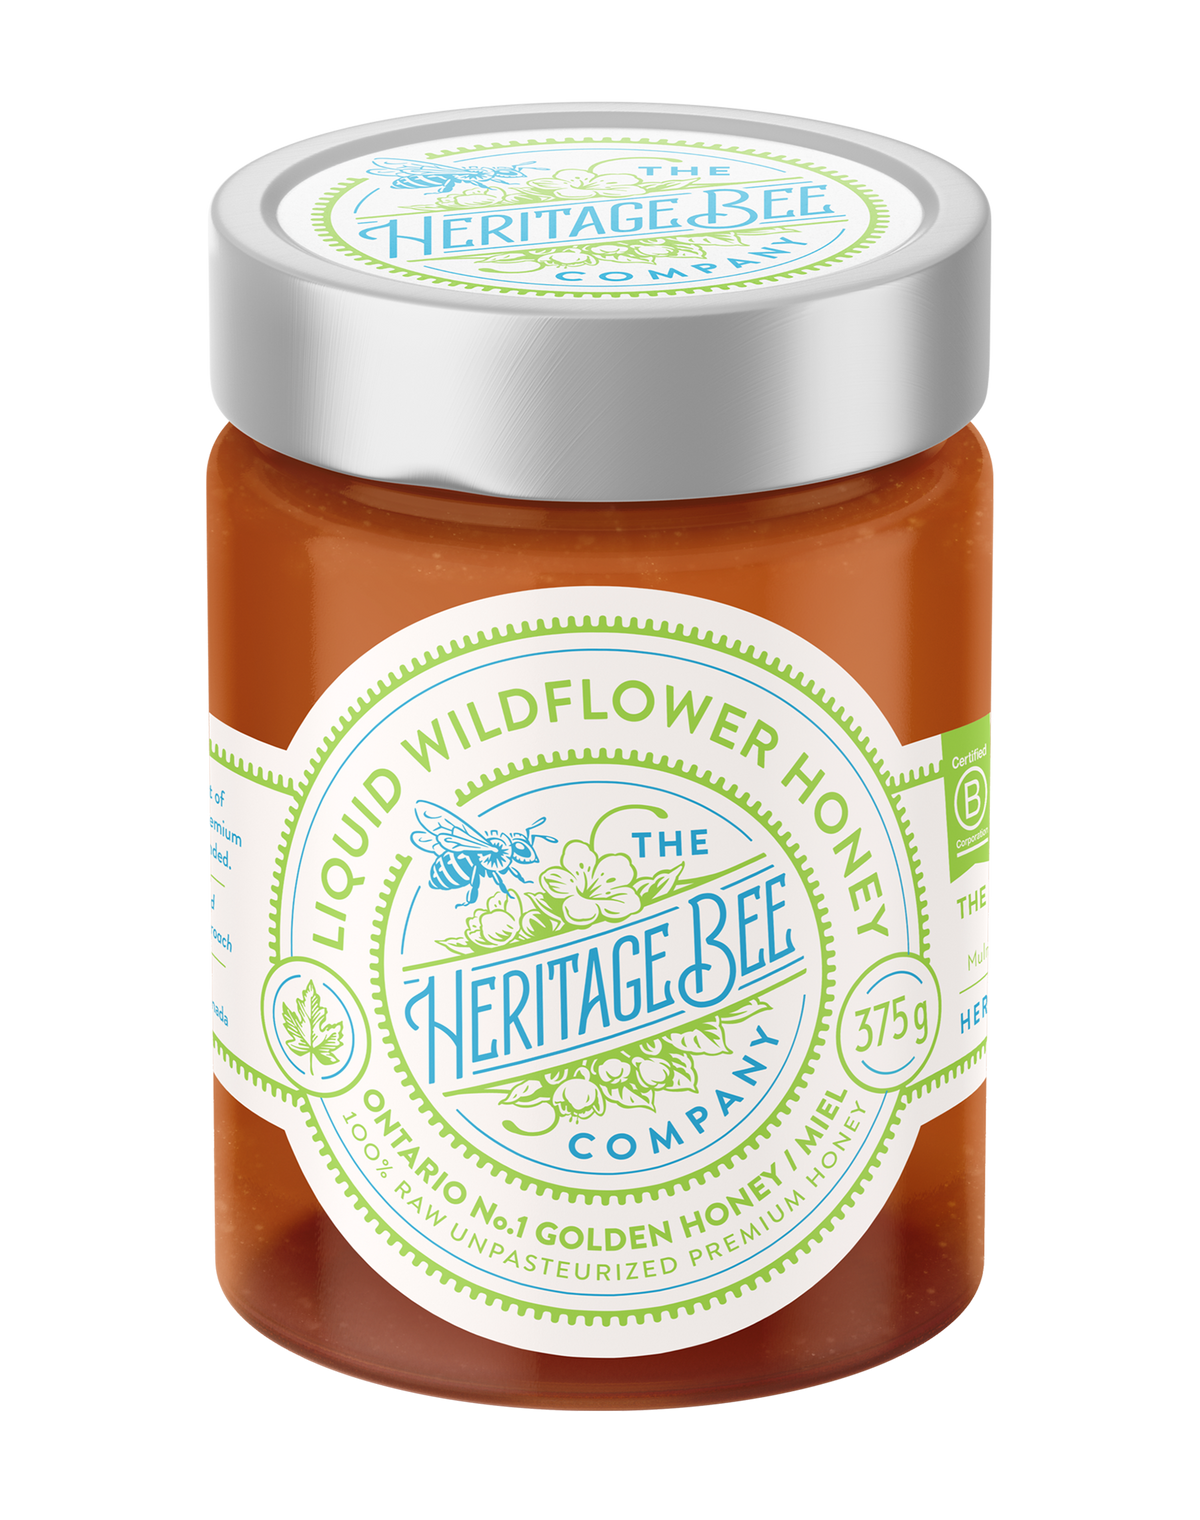 Premium local wildflower honey from meadows in Ontario.  Produced by Heritage Bee Co.  Raw unfiltered.  Honey as nature intended 